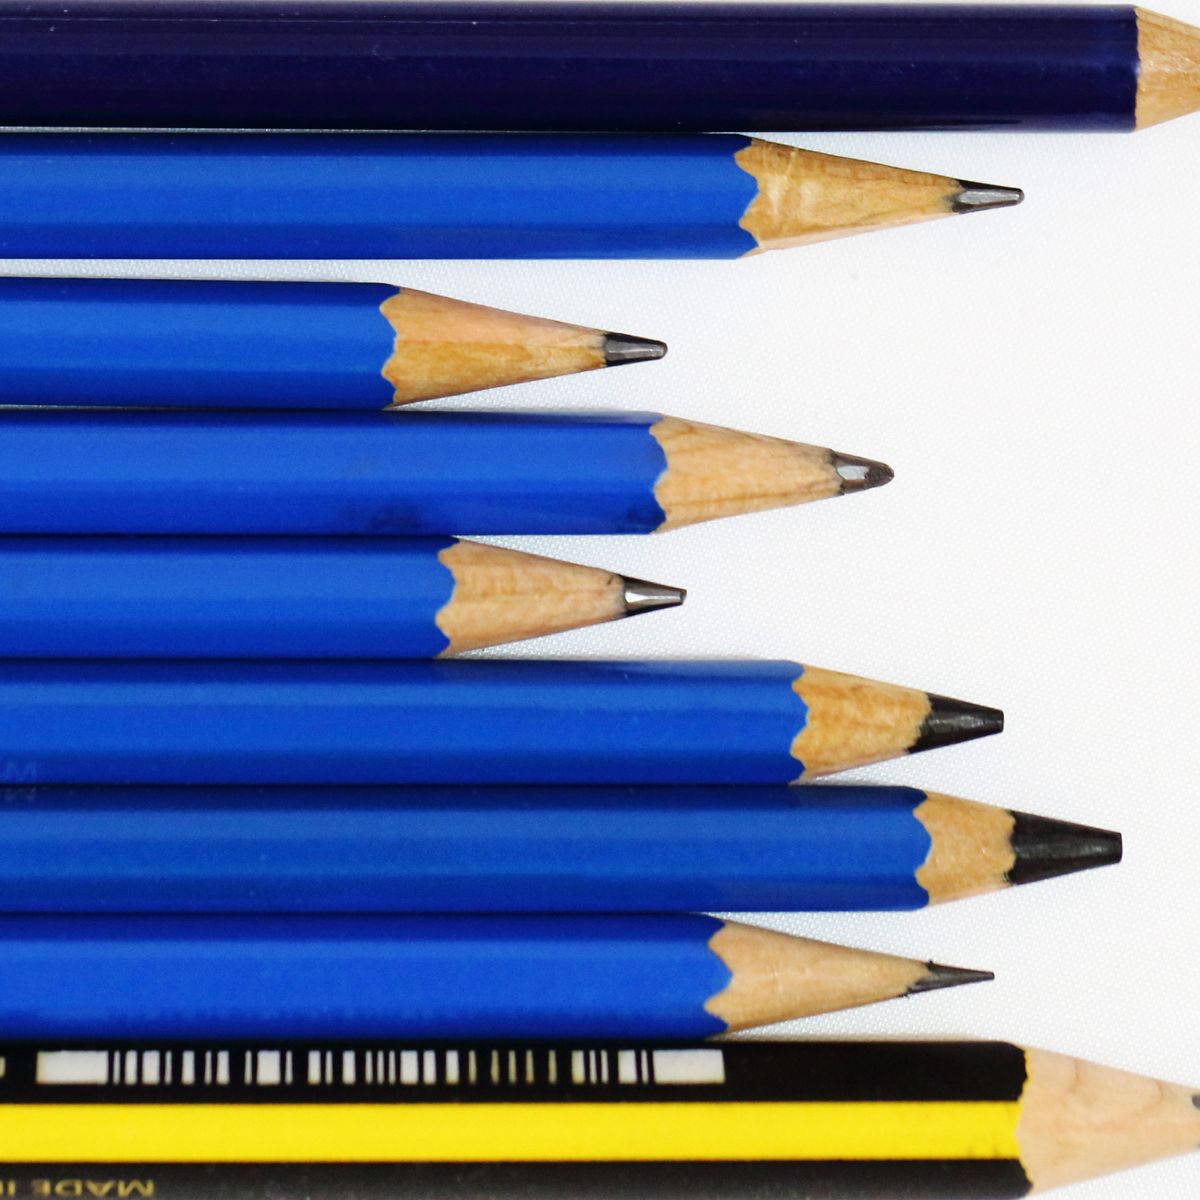 how many types of pencils are there